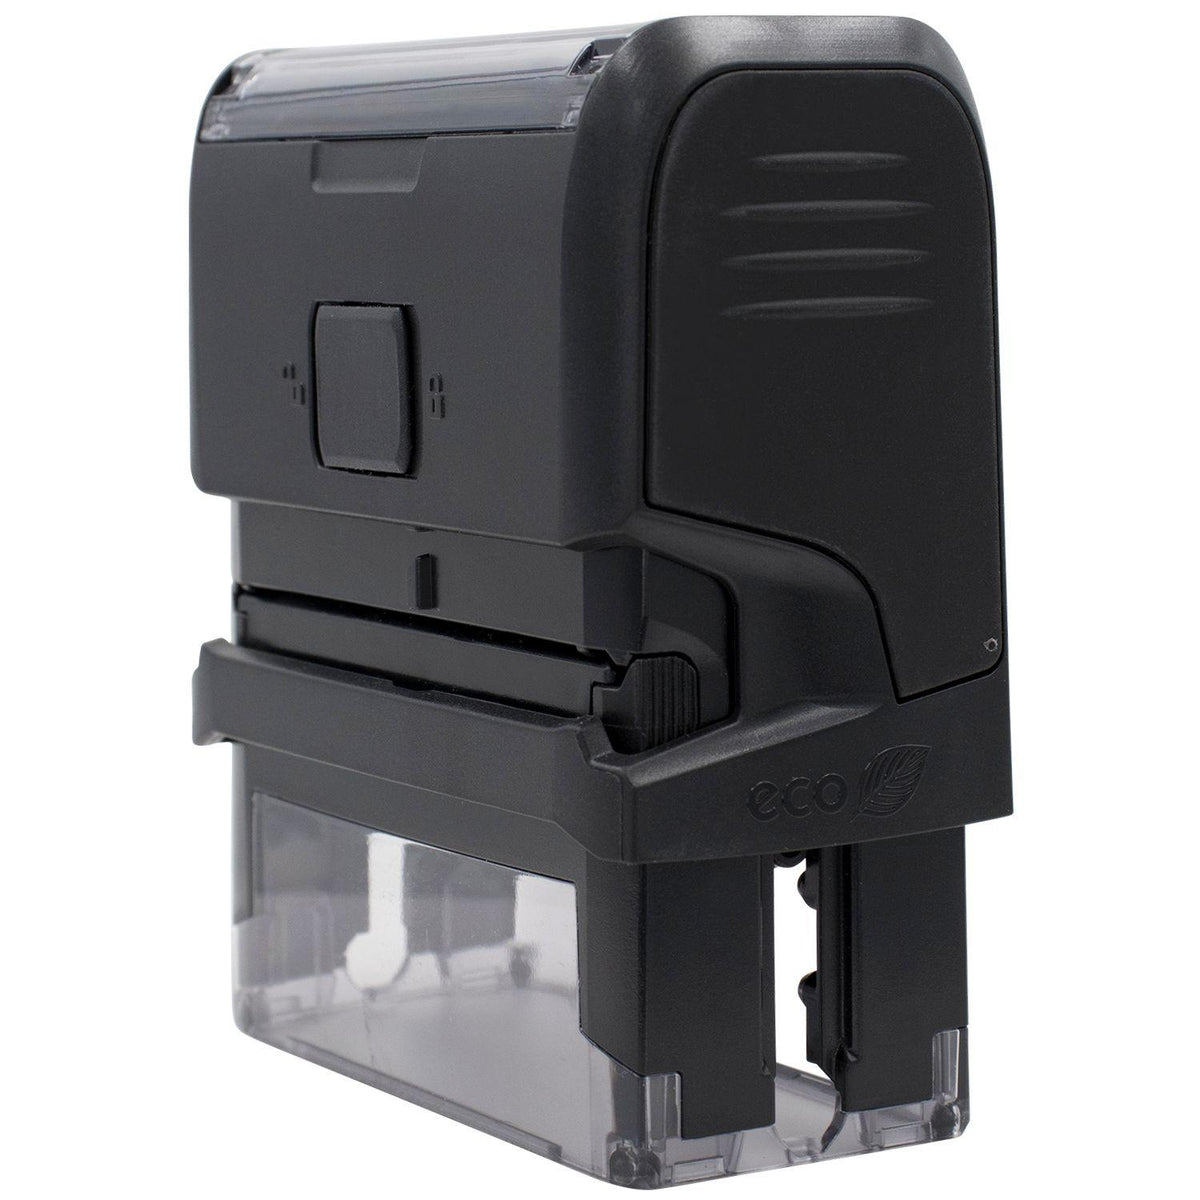 Side View of Large Self Inking Confidential Stamp at an Angle